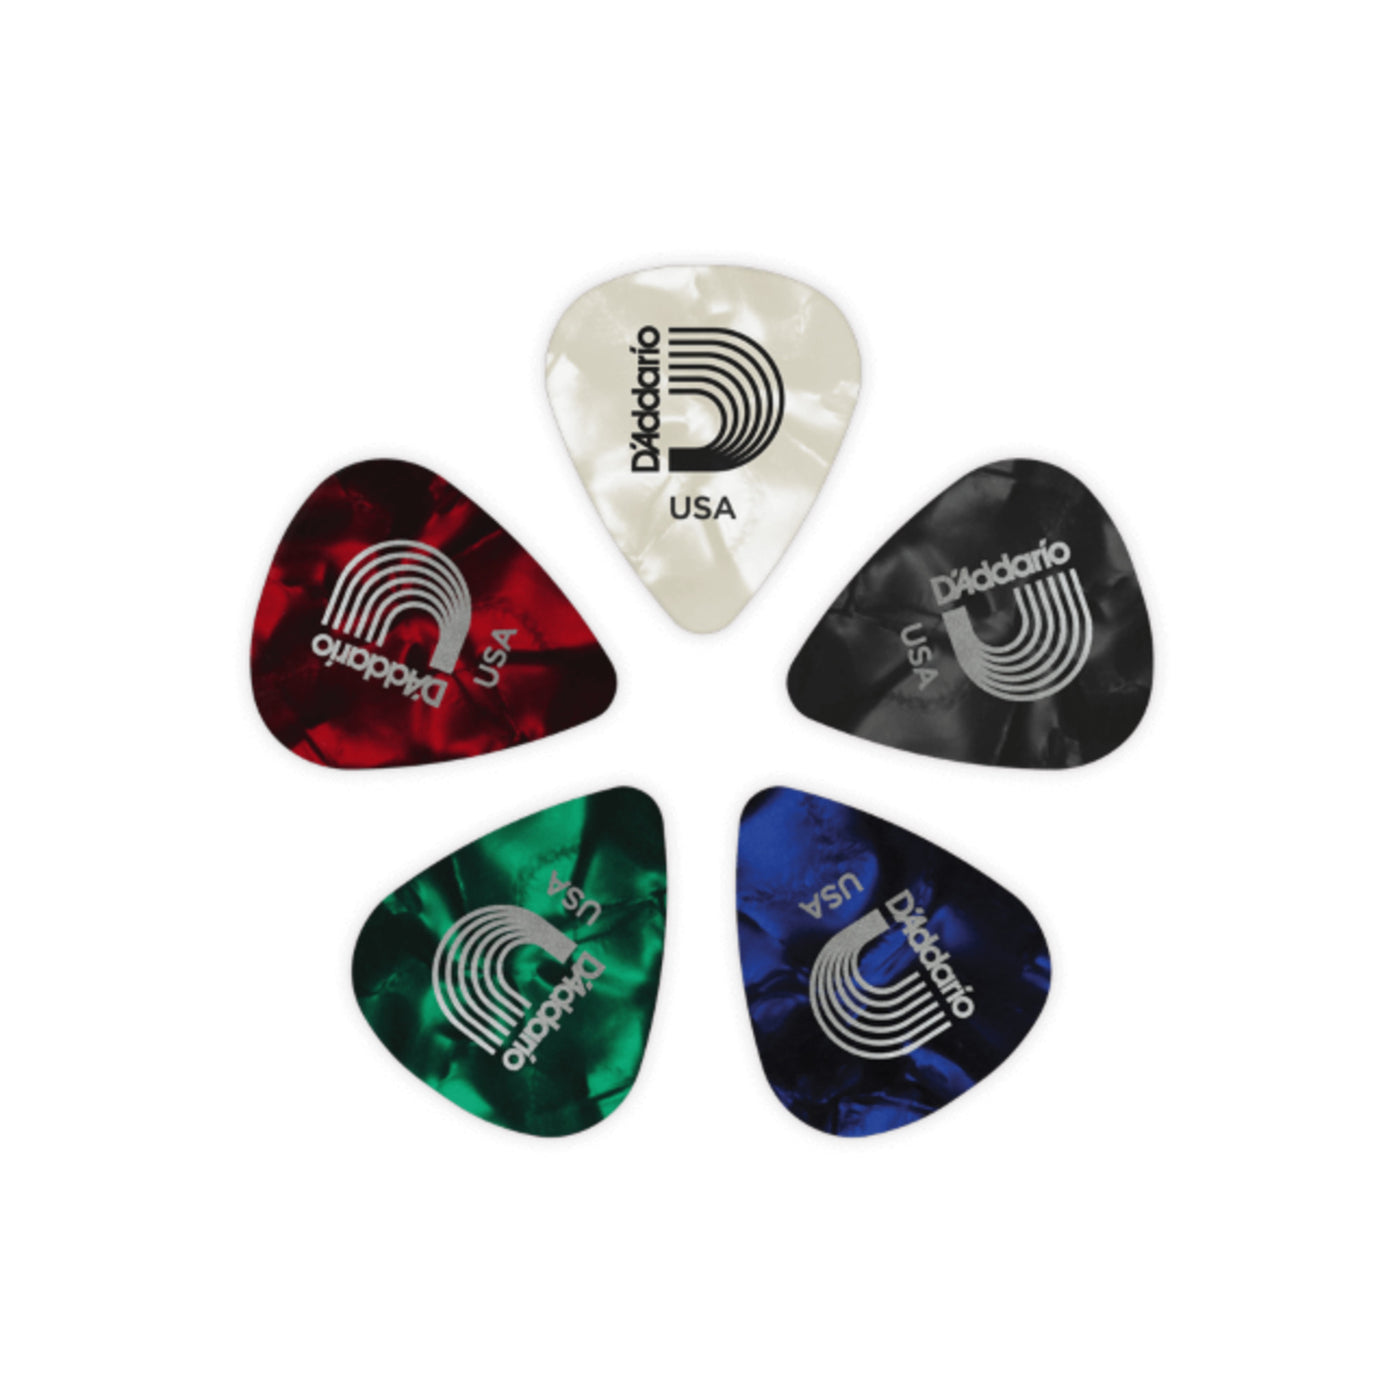 D'Addario Assorted Pearl Celluloid Guitar Picks, 25 Pack, Extra Heavy (1CAP7-25)